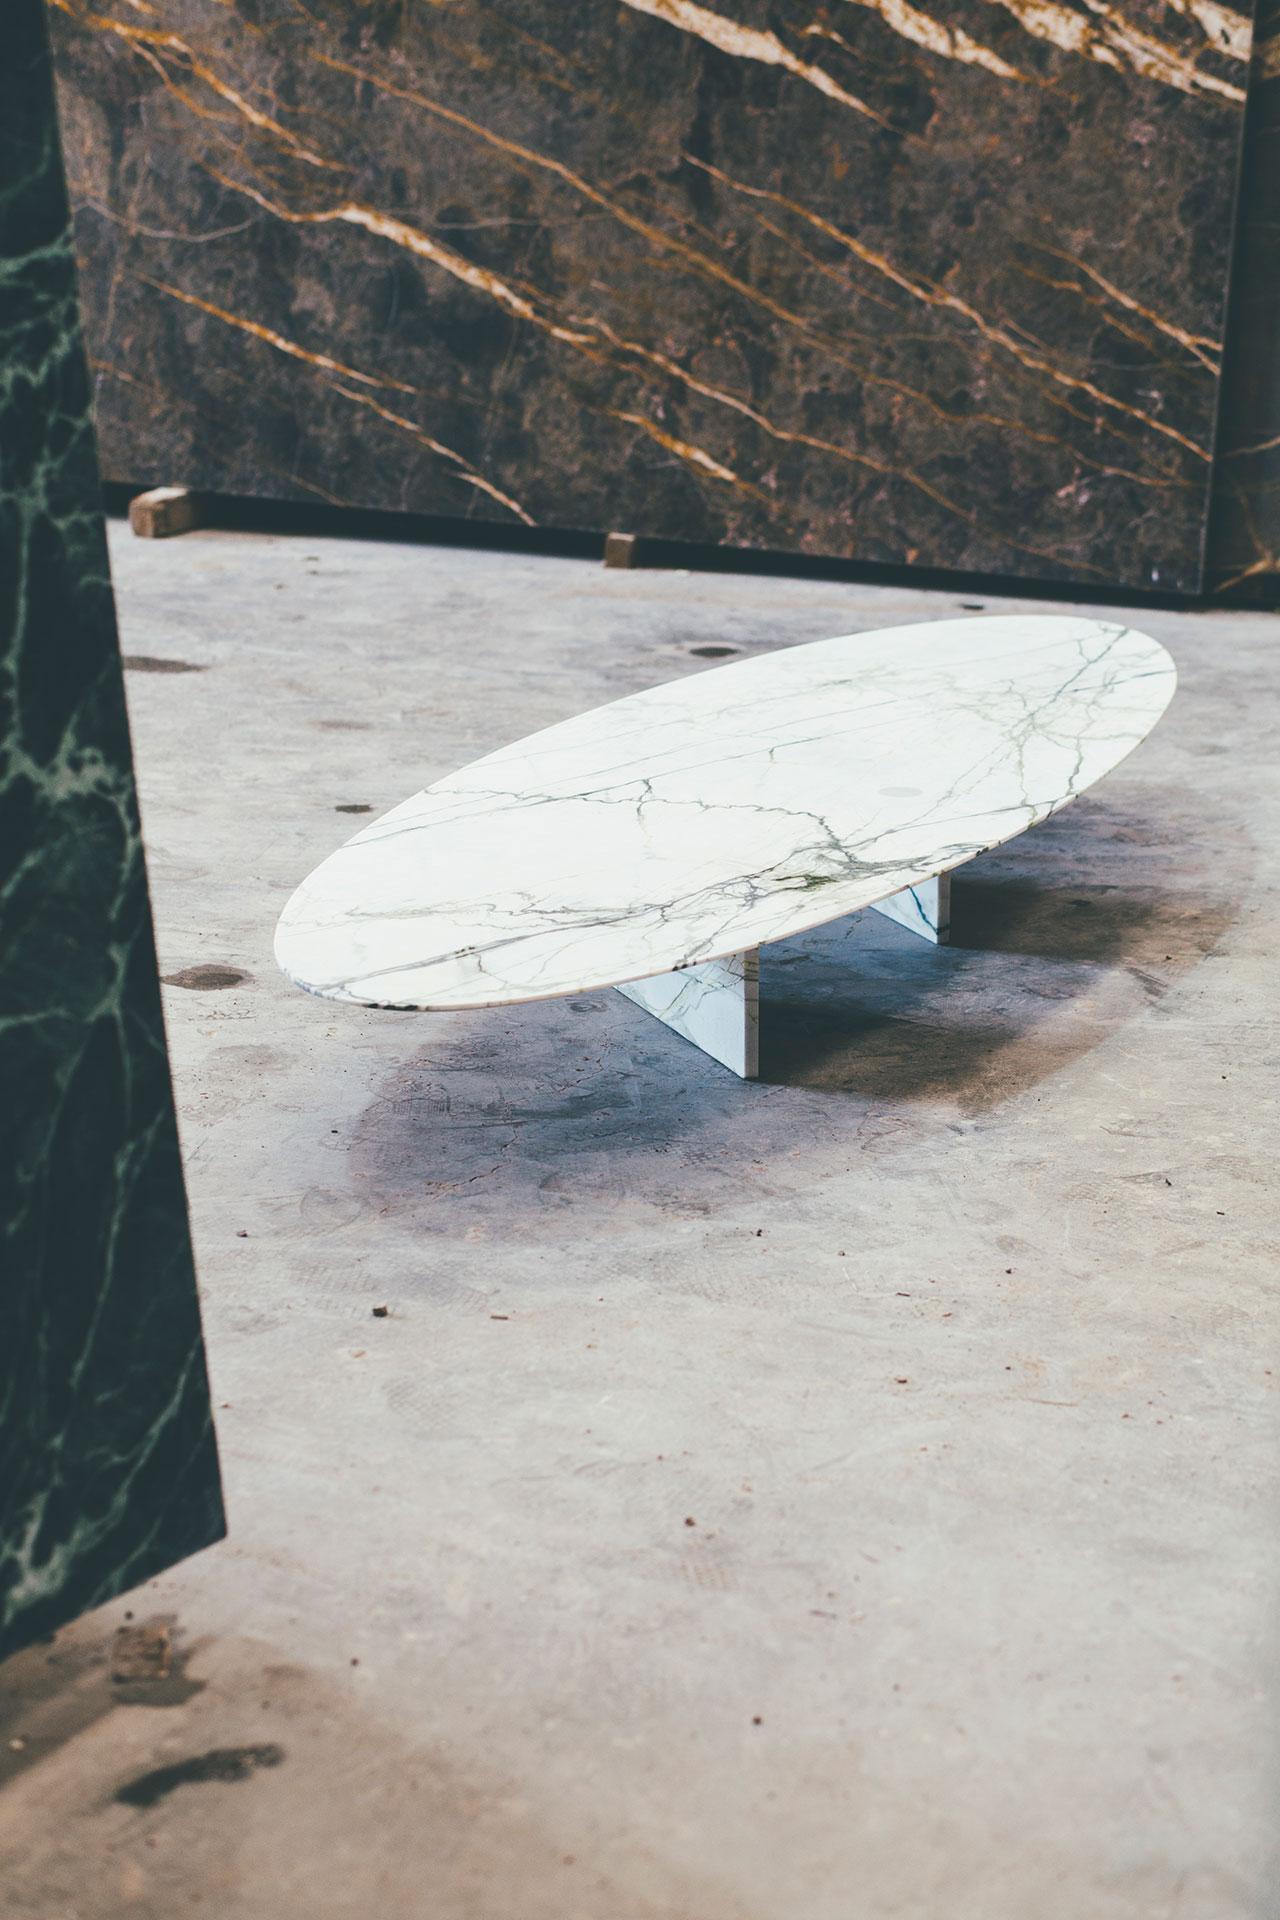 Ellipse low table by Jeroen Thys van den Audenaerde
Dimensions: 23.5 x 220 x 74 cm
Marble and brass.

Made of carefully chosen marble and fnished with functional
brass details. These collectible pieces come in a limited edition.

Barh is a